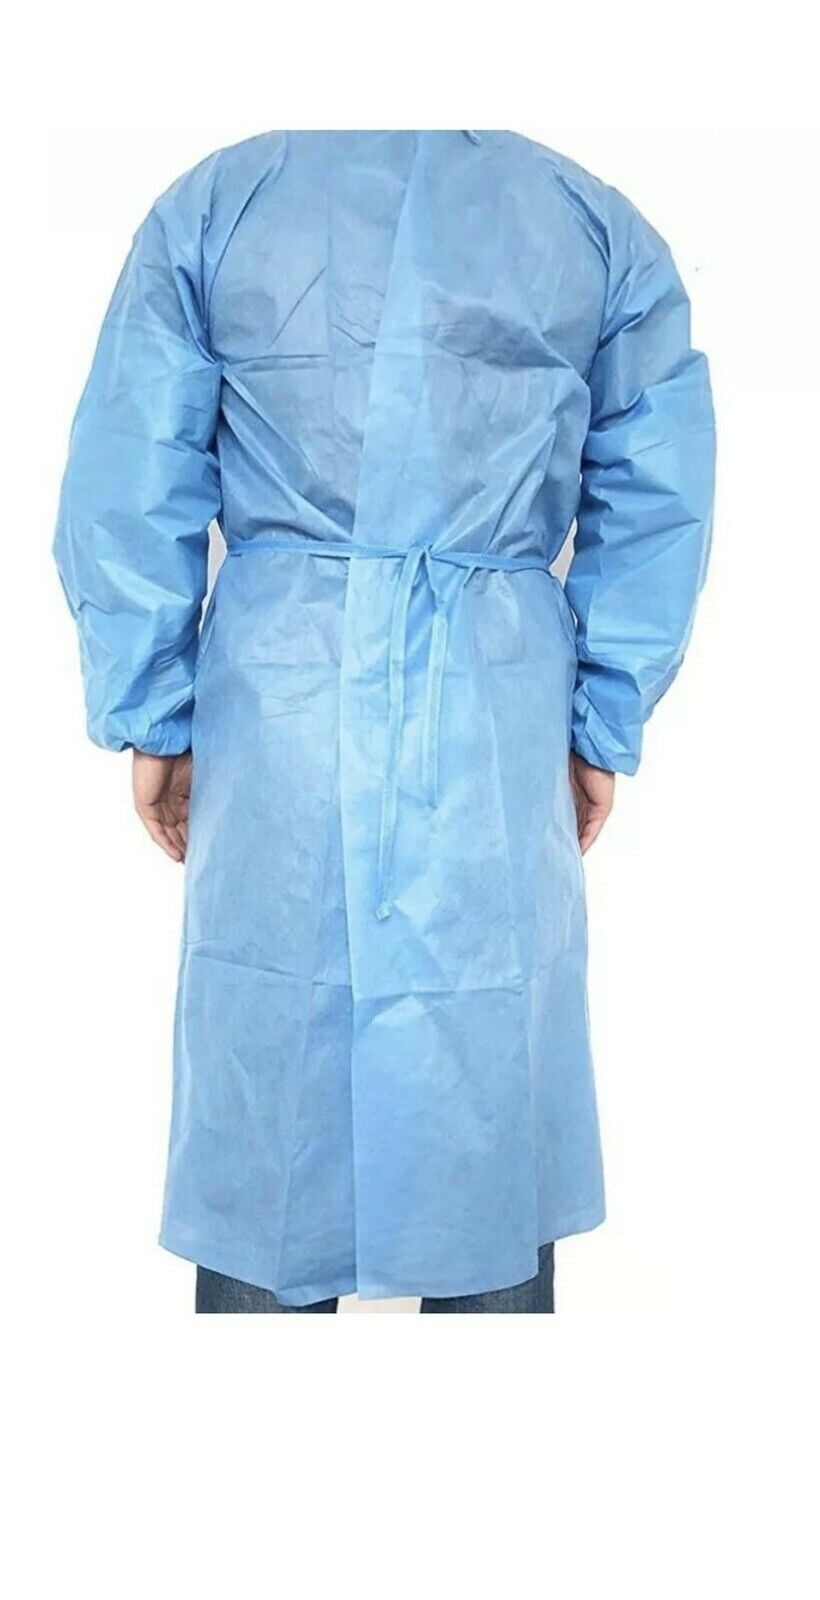 10pc Disposable Isolation Gown Doctor Nurse Workwear Outdoor Protective Clothes 